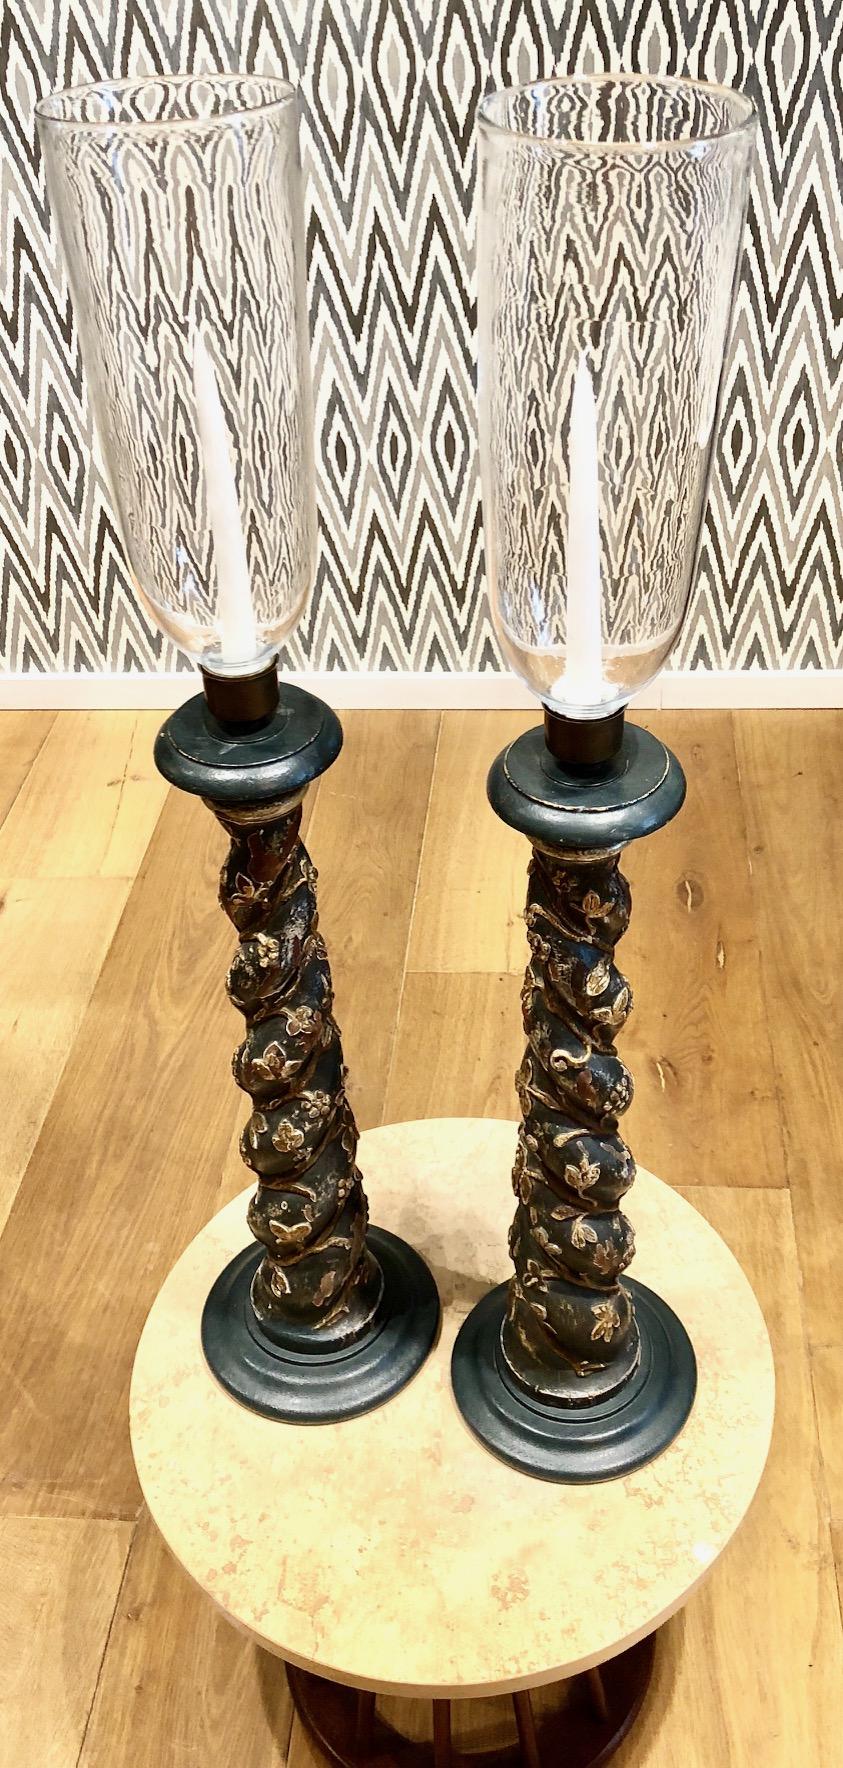 Late 18th century Venetian candleholders, with removable hand blown Hurricane glass cover of exceptional height and scale. Original polychromed decoration
Spiraled wood stem with carved floral and grape vine motifs.